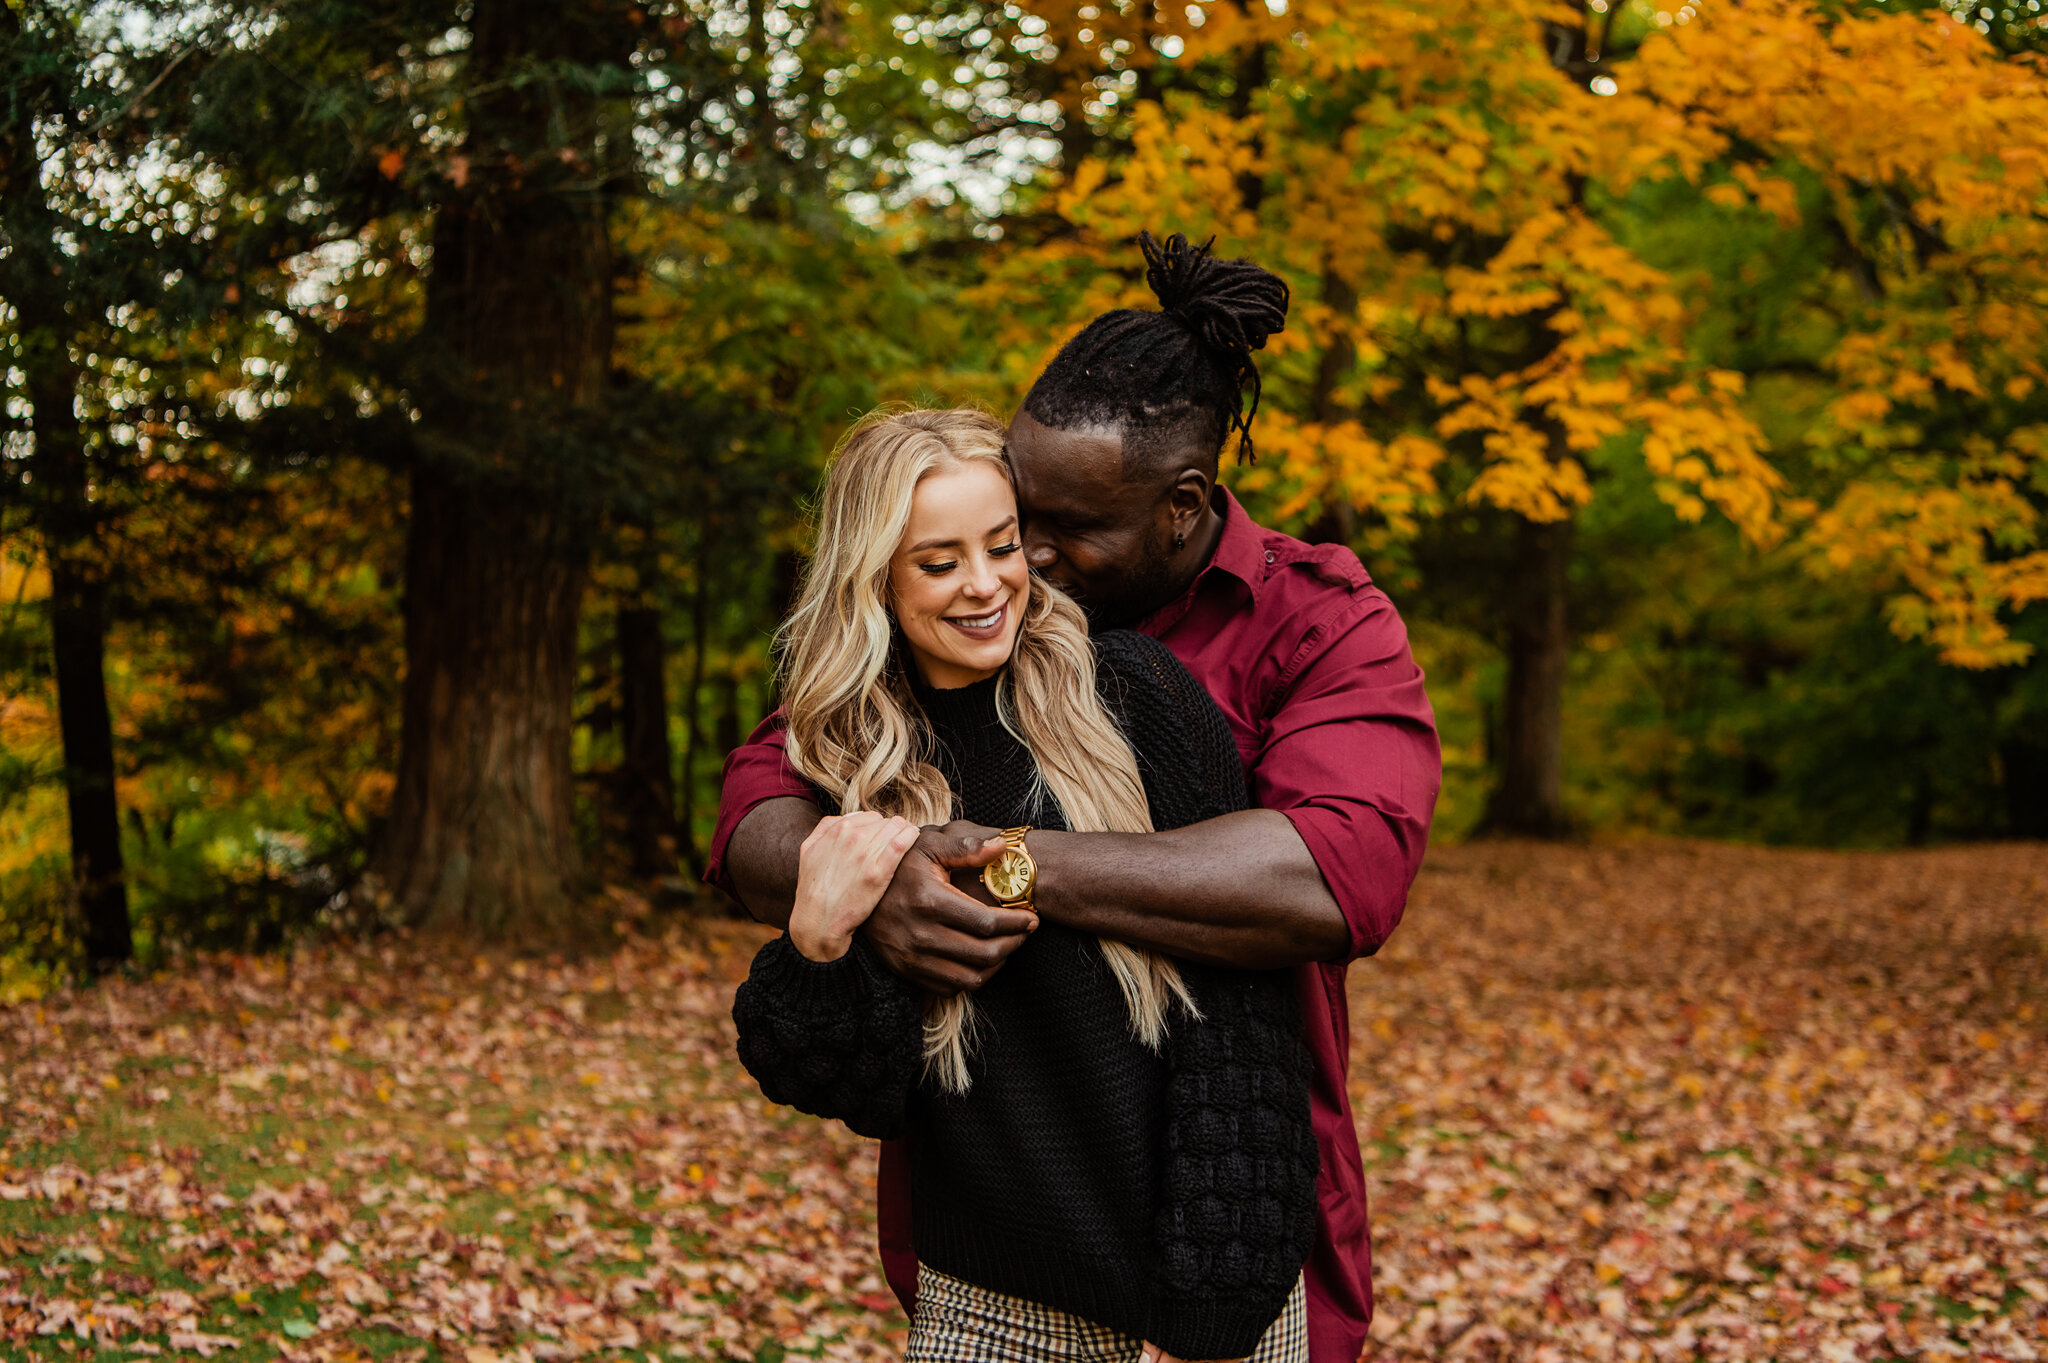 Letchworth_State_Park_Rochester_Couples_Session_JILL_STUDIO_Rochester_NY_Photographer_9275.jpg